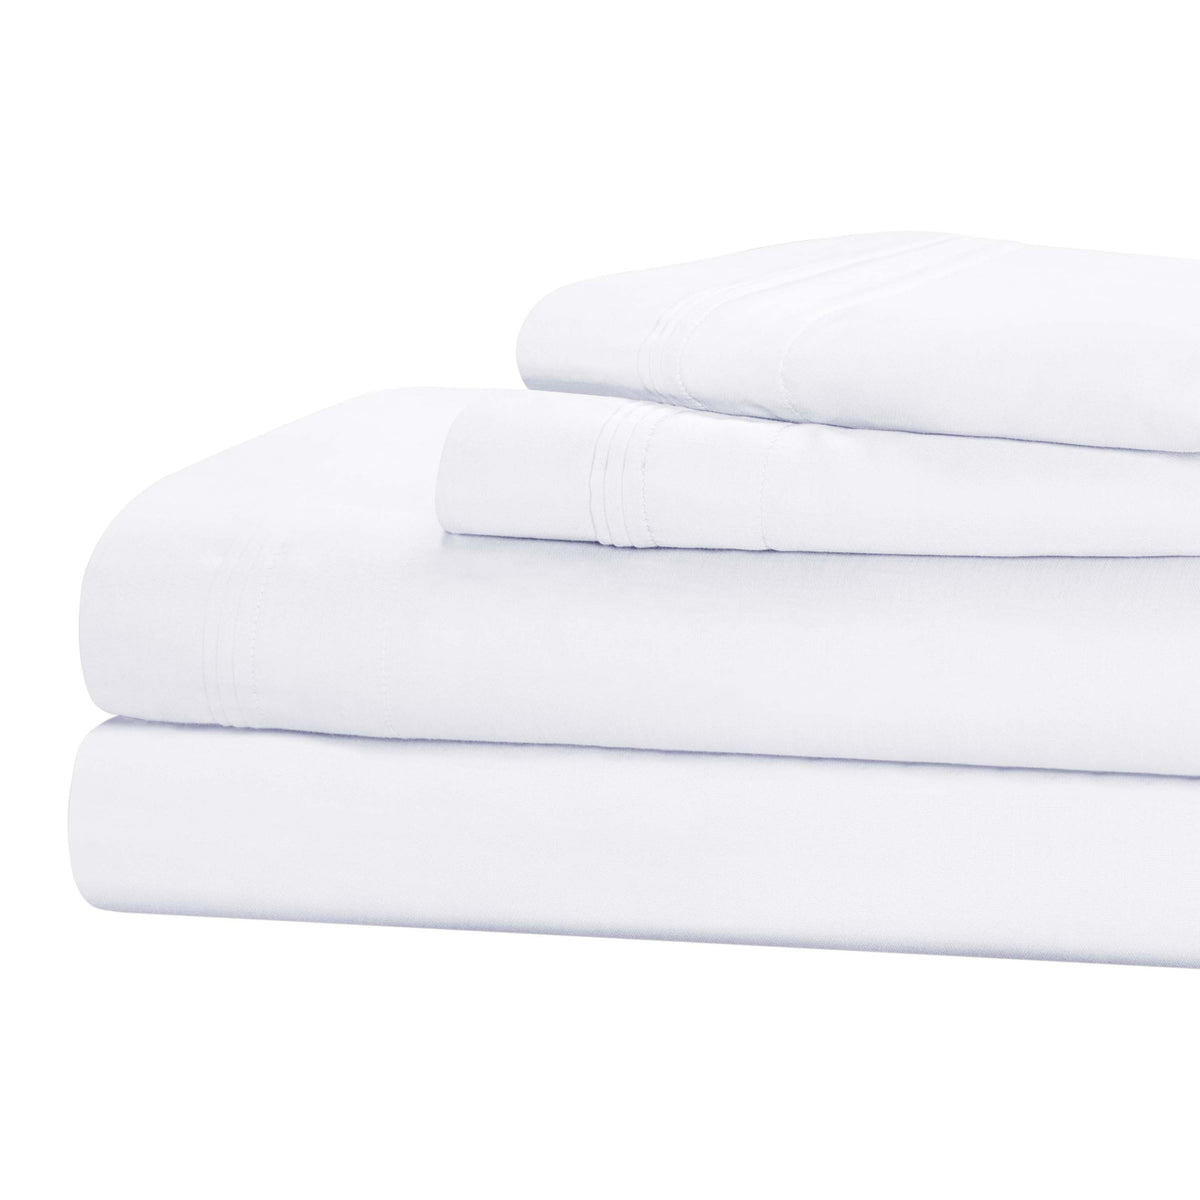 Egyptian Cotton 1500 Thread Count Eco Friendly Solid Sheet Set